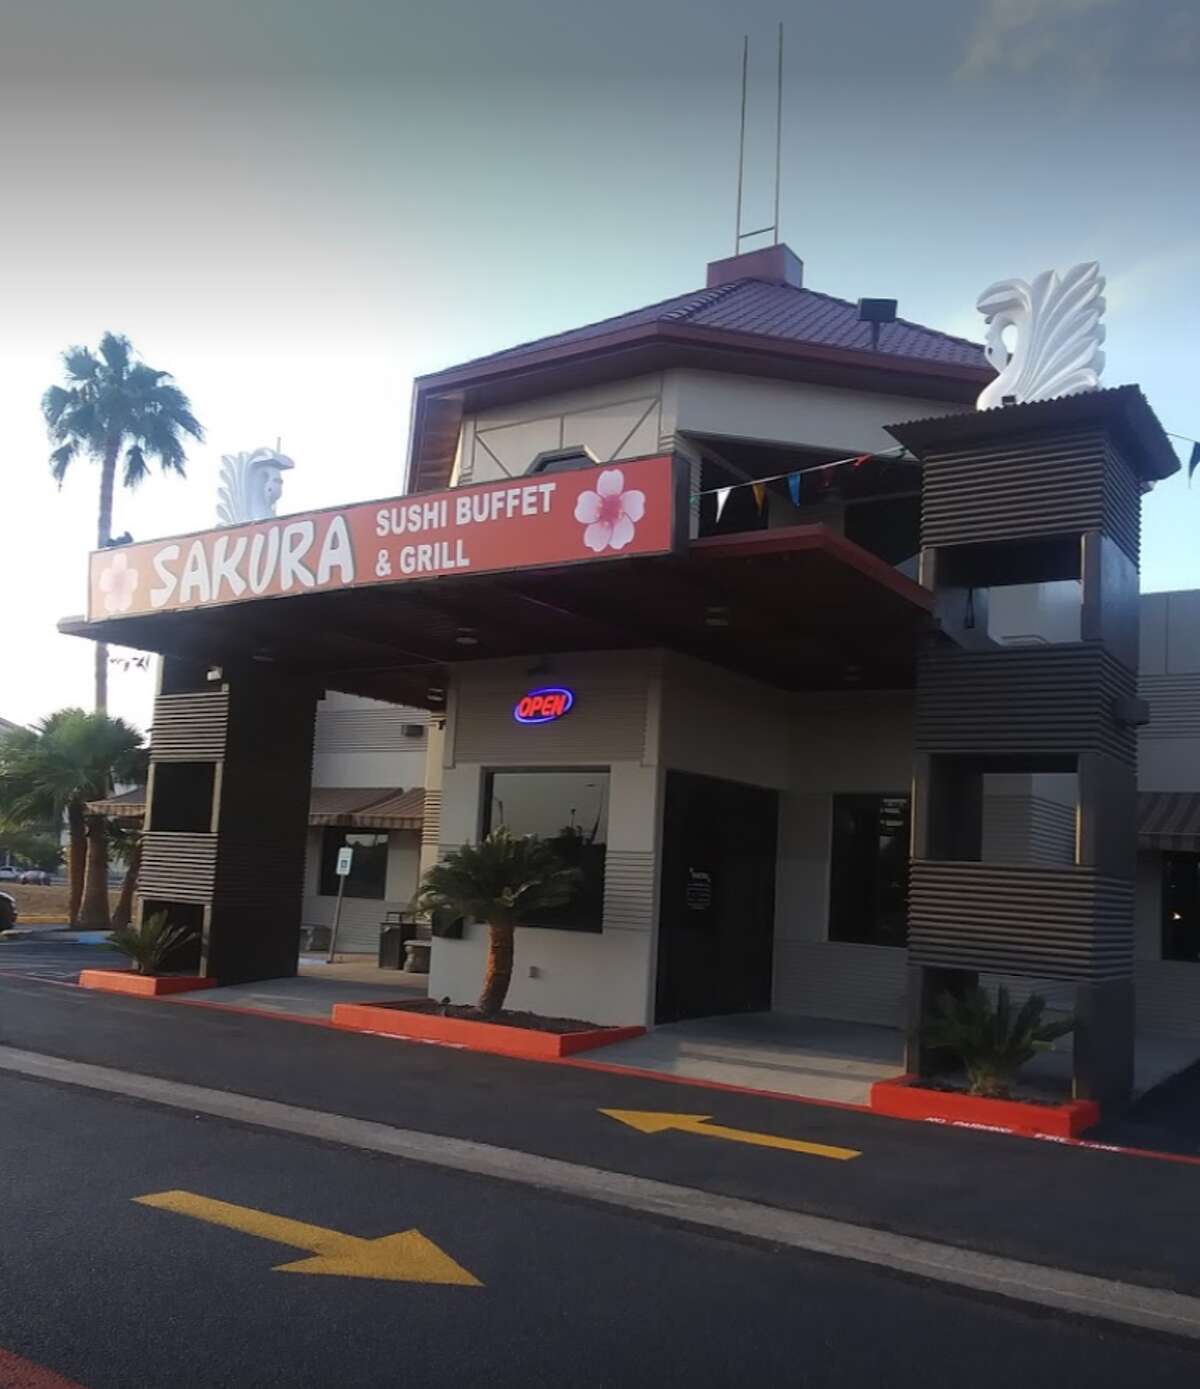 Pictured is Sakura Sushi, located at 1920 E Saunders St. in Laredo.